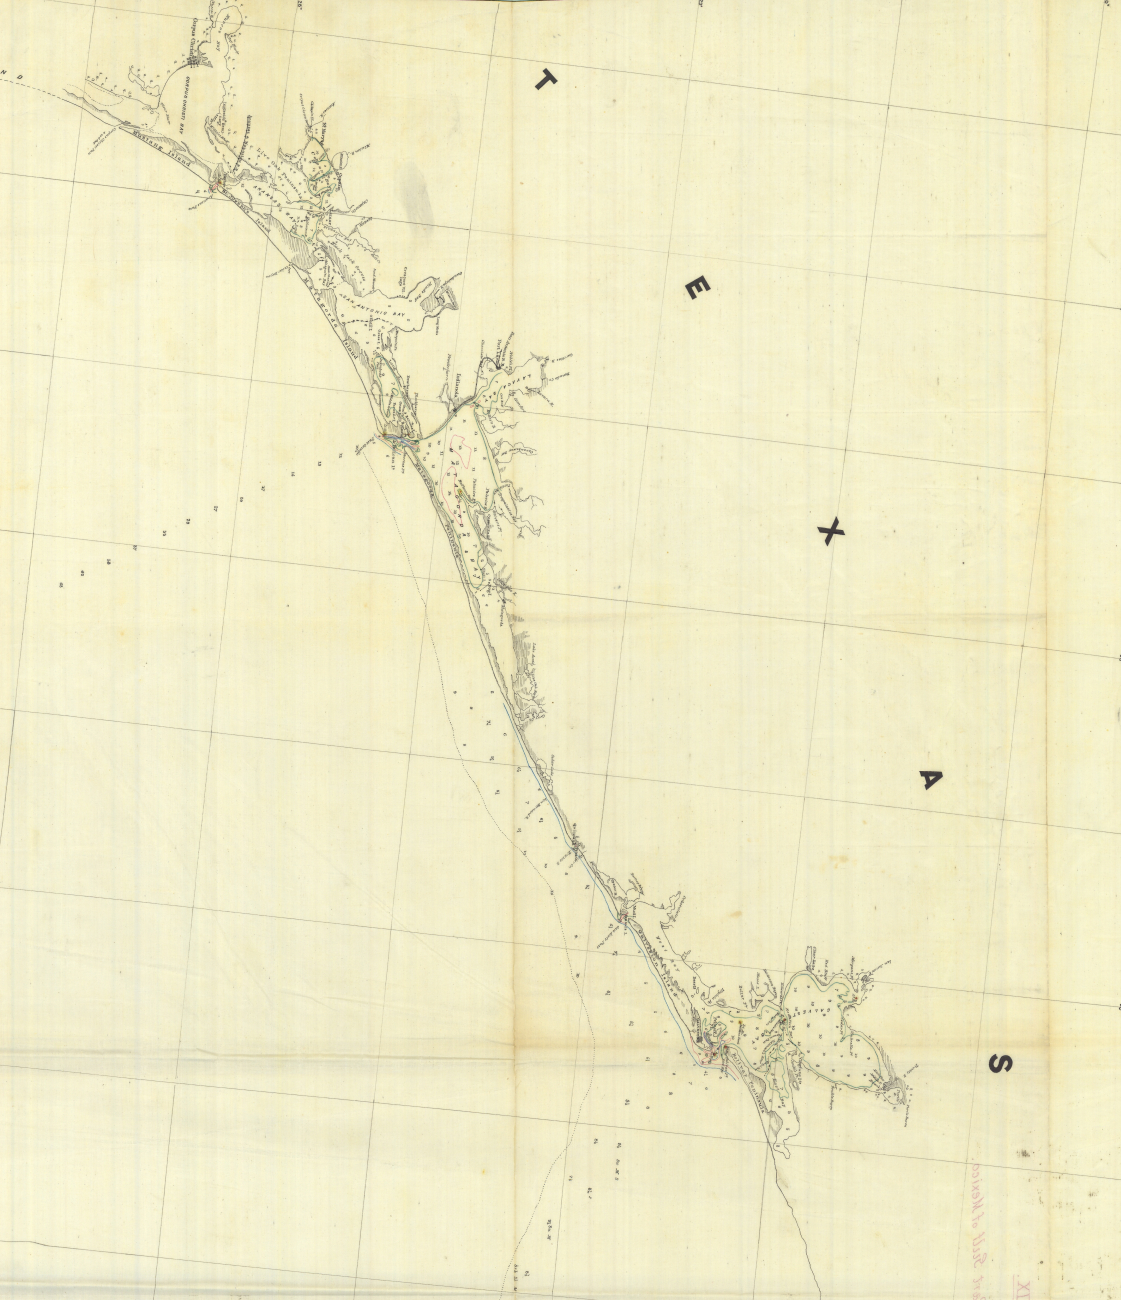 Reconnaissance map of the Coast of Texas from Corpus Christi to BolivarPeninsula